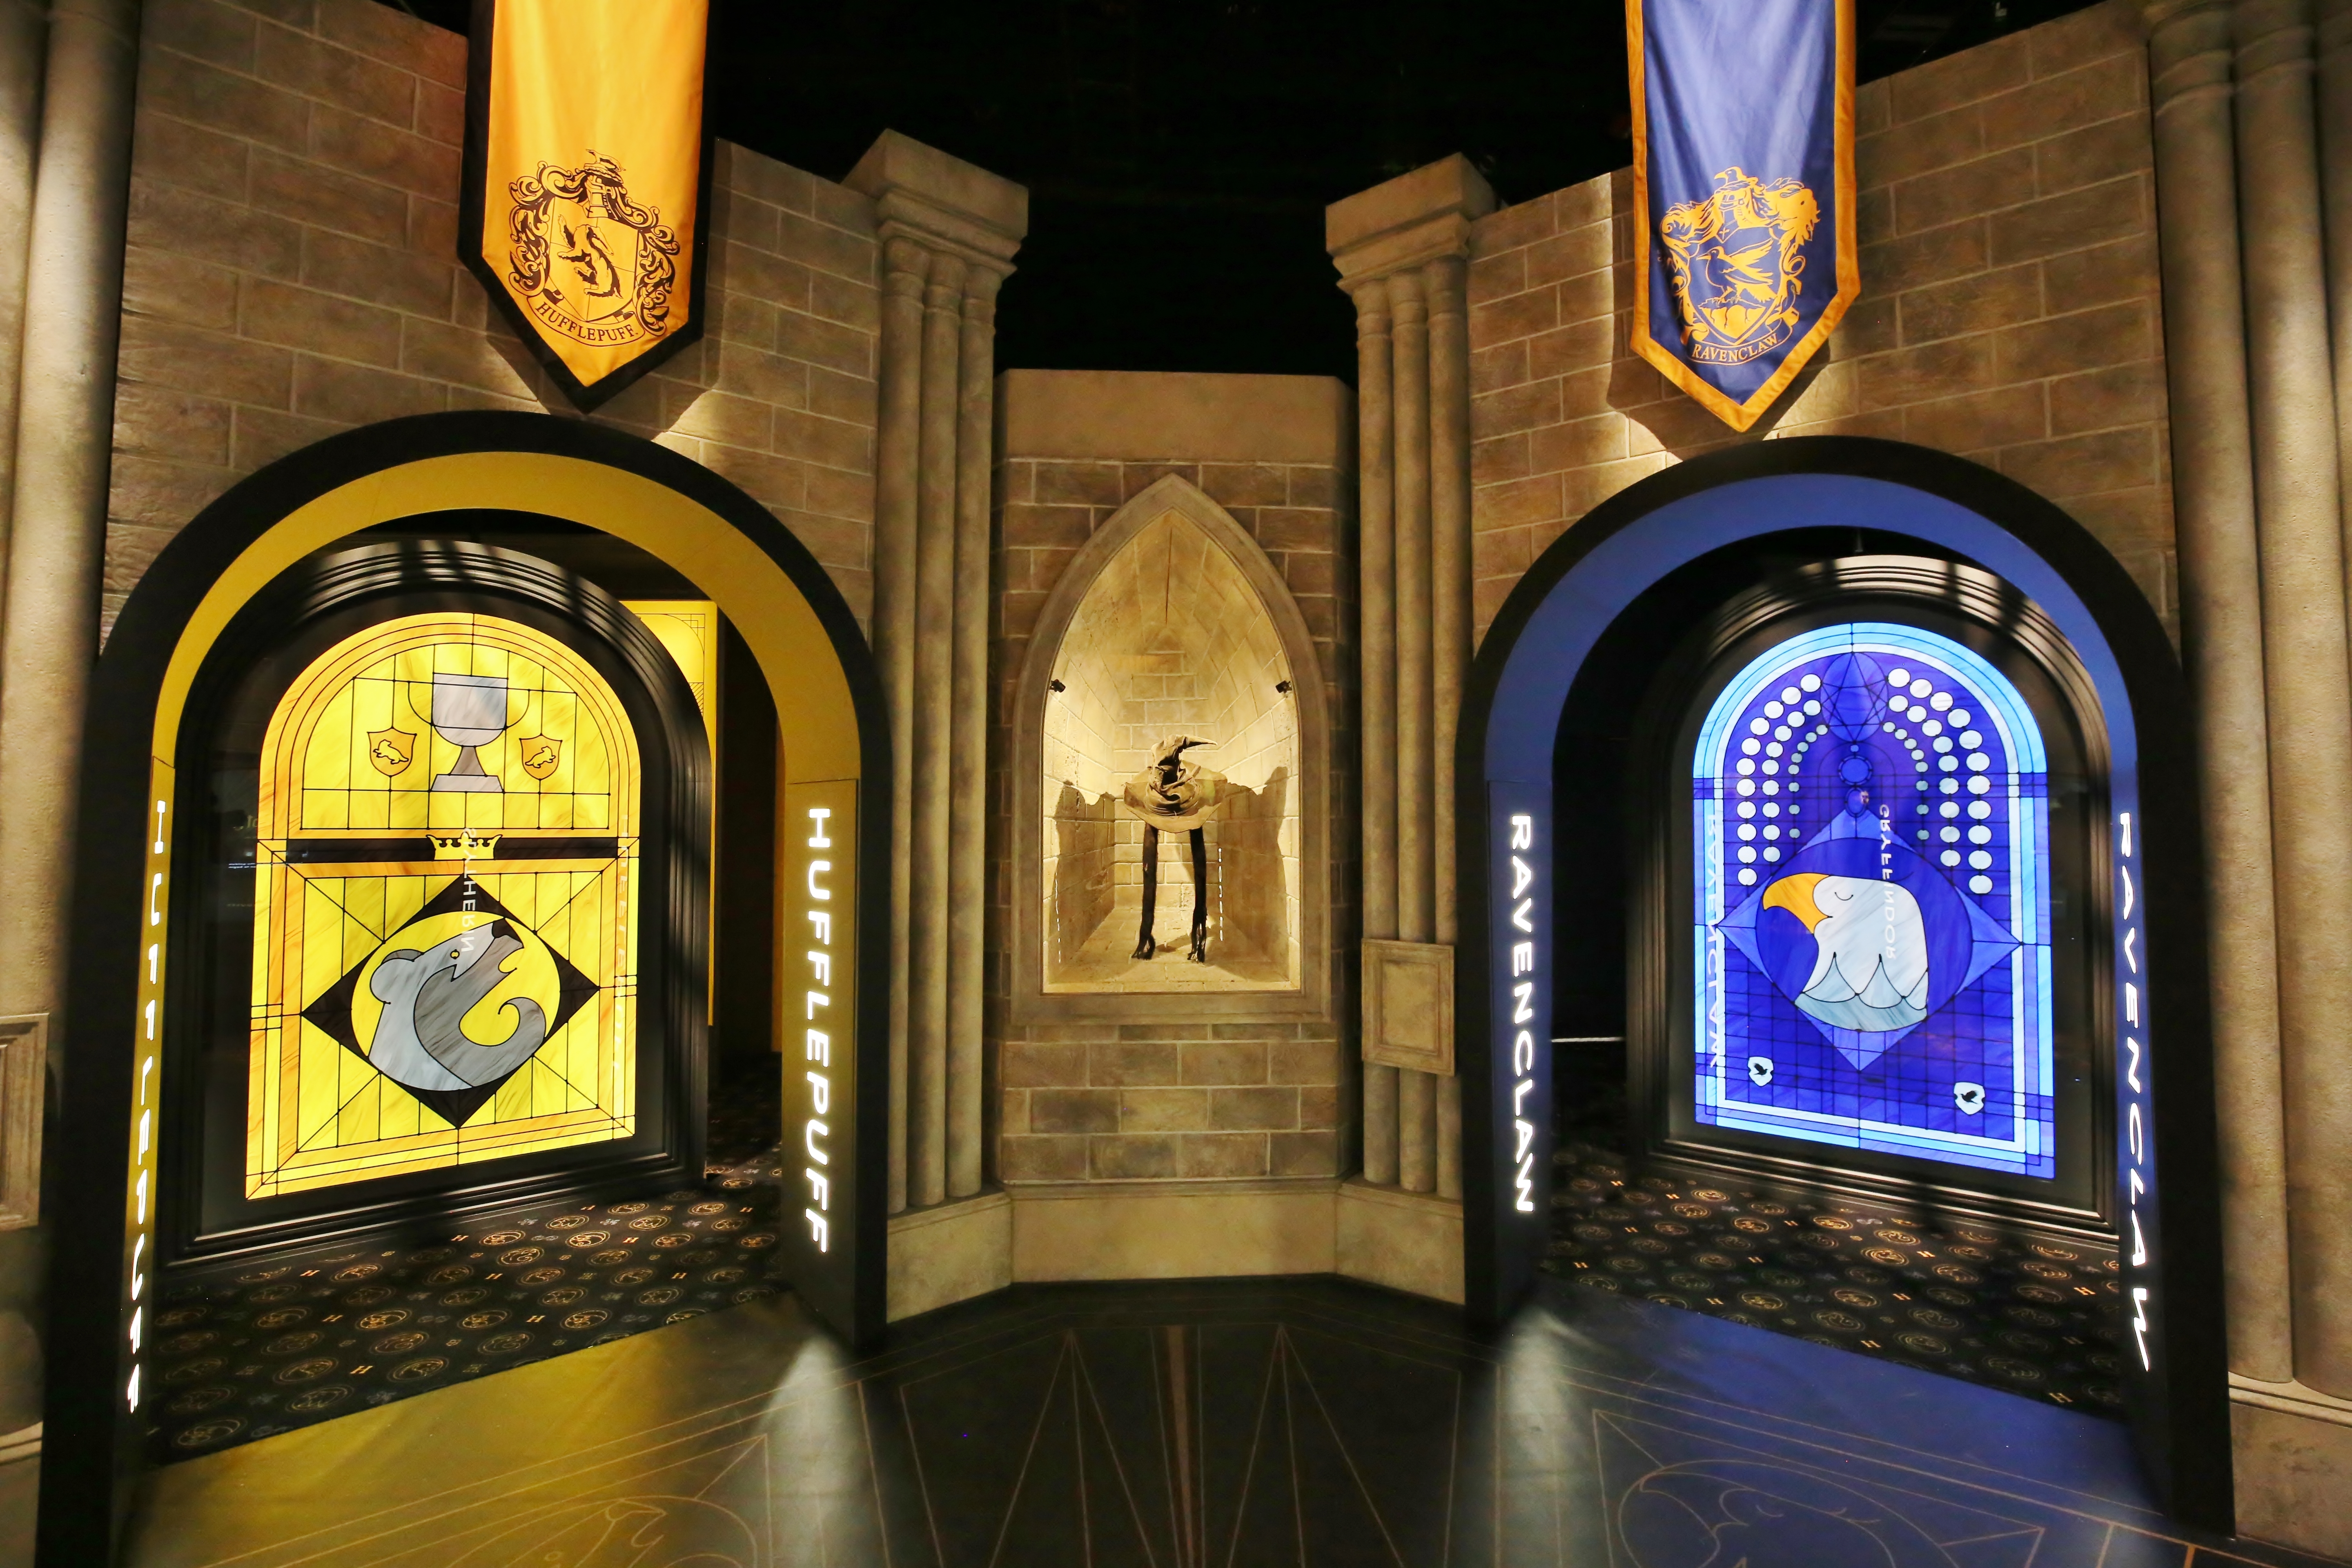 Harry Potter: The Exhibition' held in Lisbon